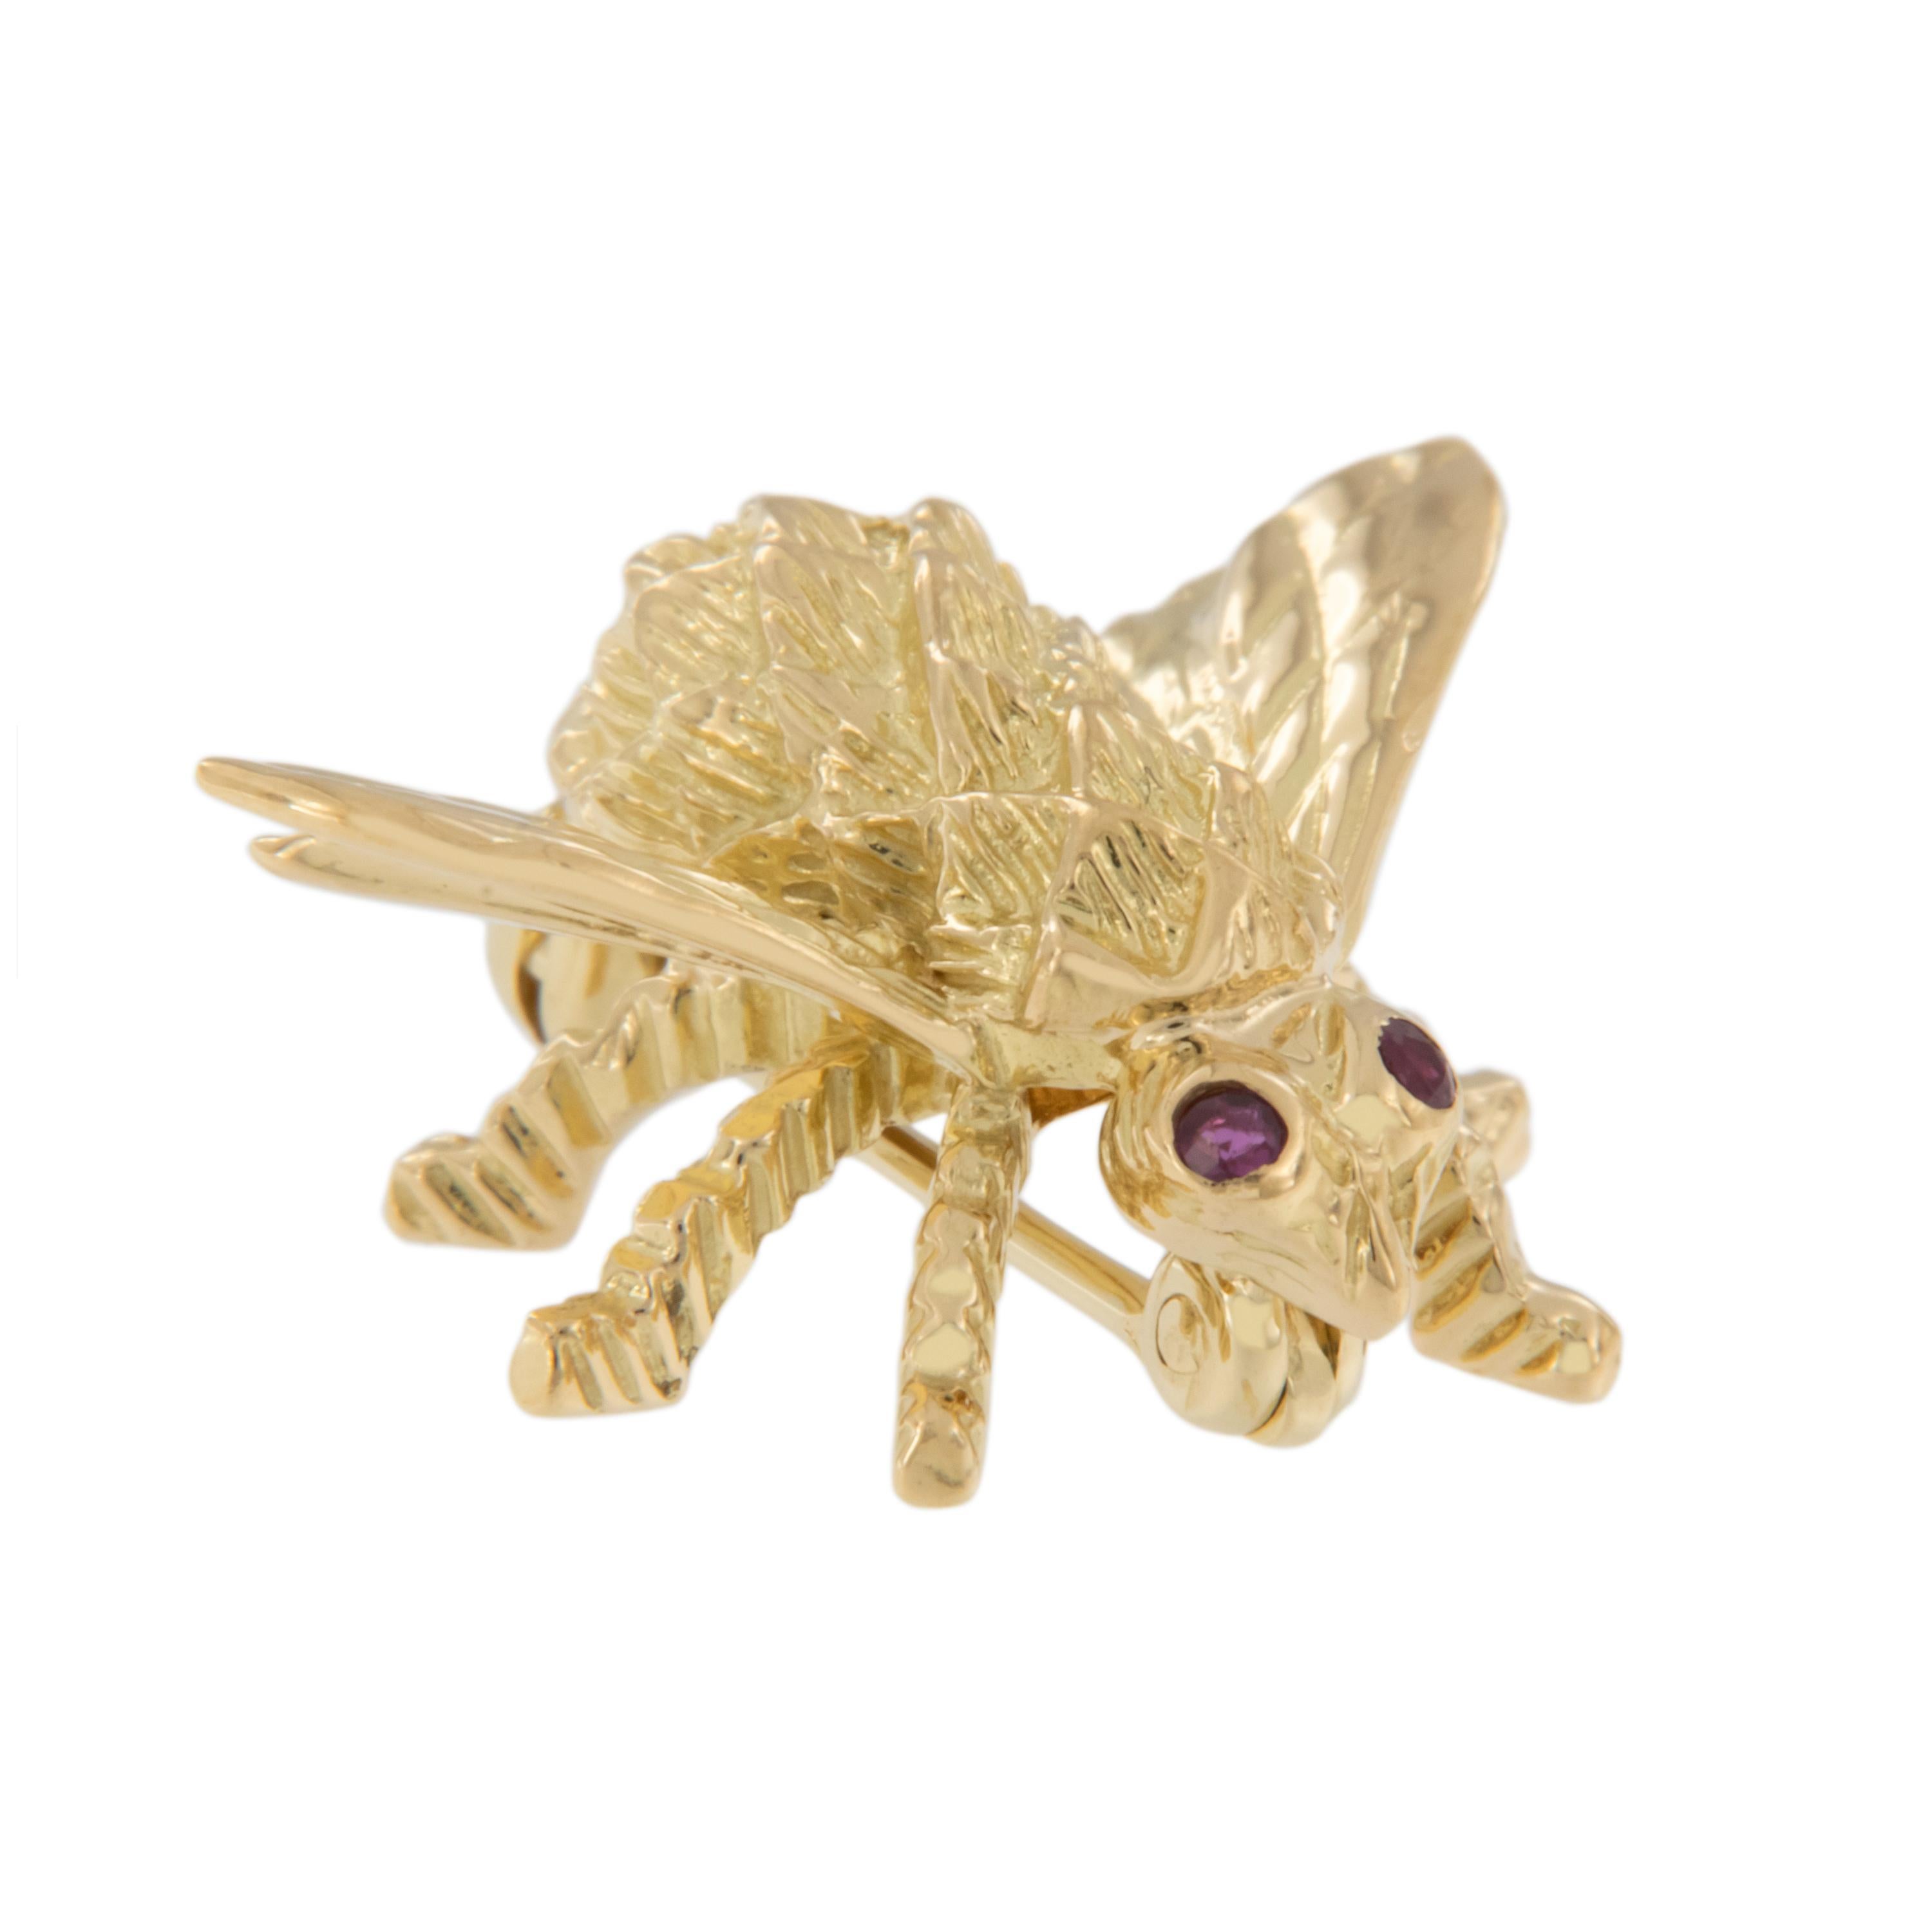 Collectable and charming this adorable bee pin by Herbert Rosenthal is comprised of 18 karat yellow gold with beautifully executed finishing detail. Would look perfect whether worn on your shoulder, lapel, jacket or hanging from a chain. Two rubies